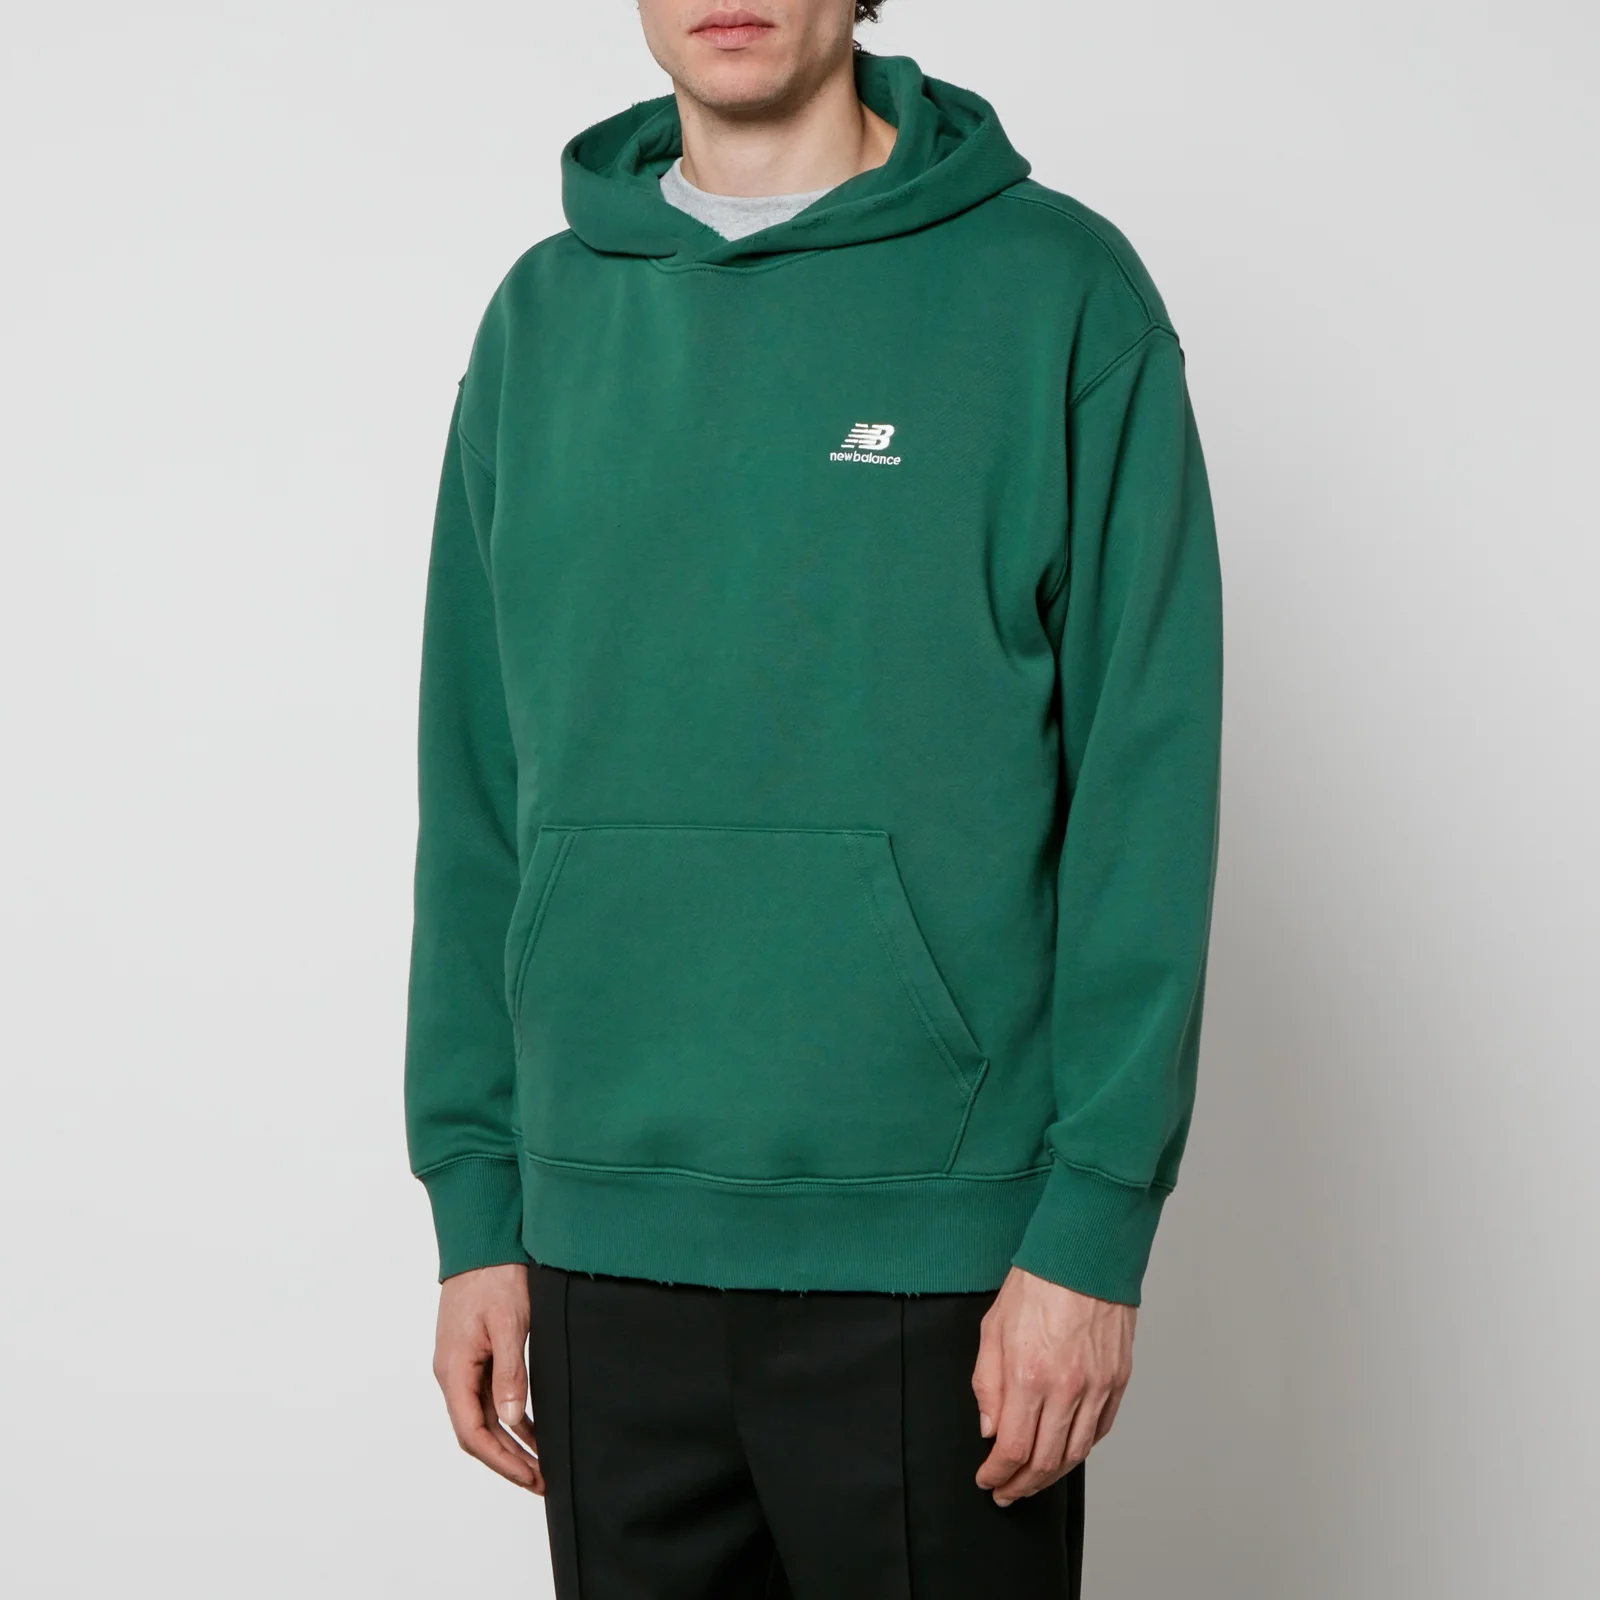 New Balance Hoops Cotton-Blend Hoodie Image 1